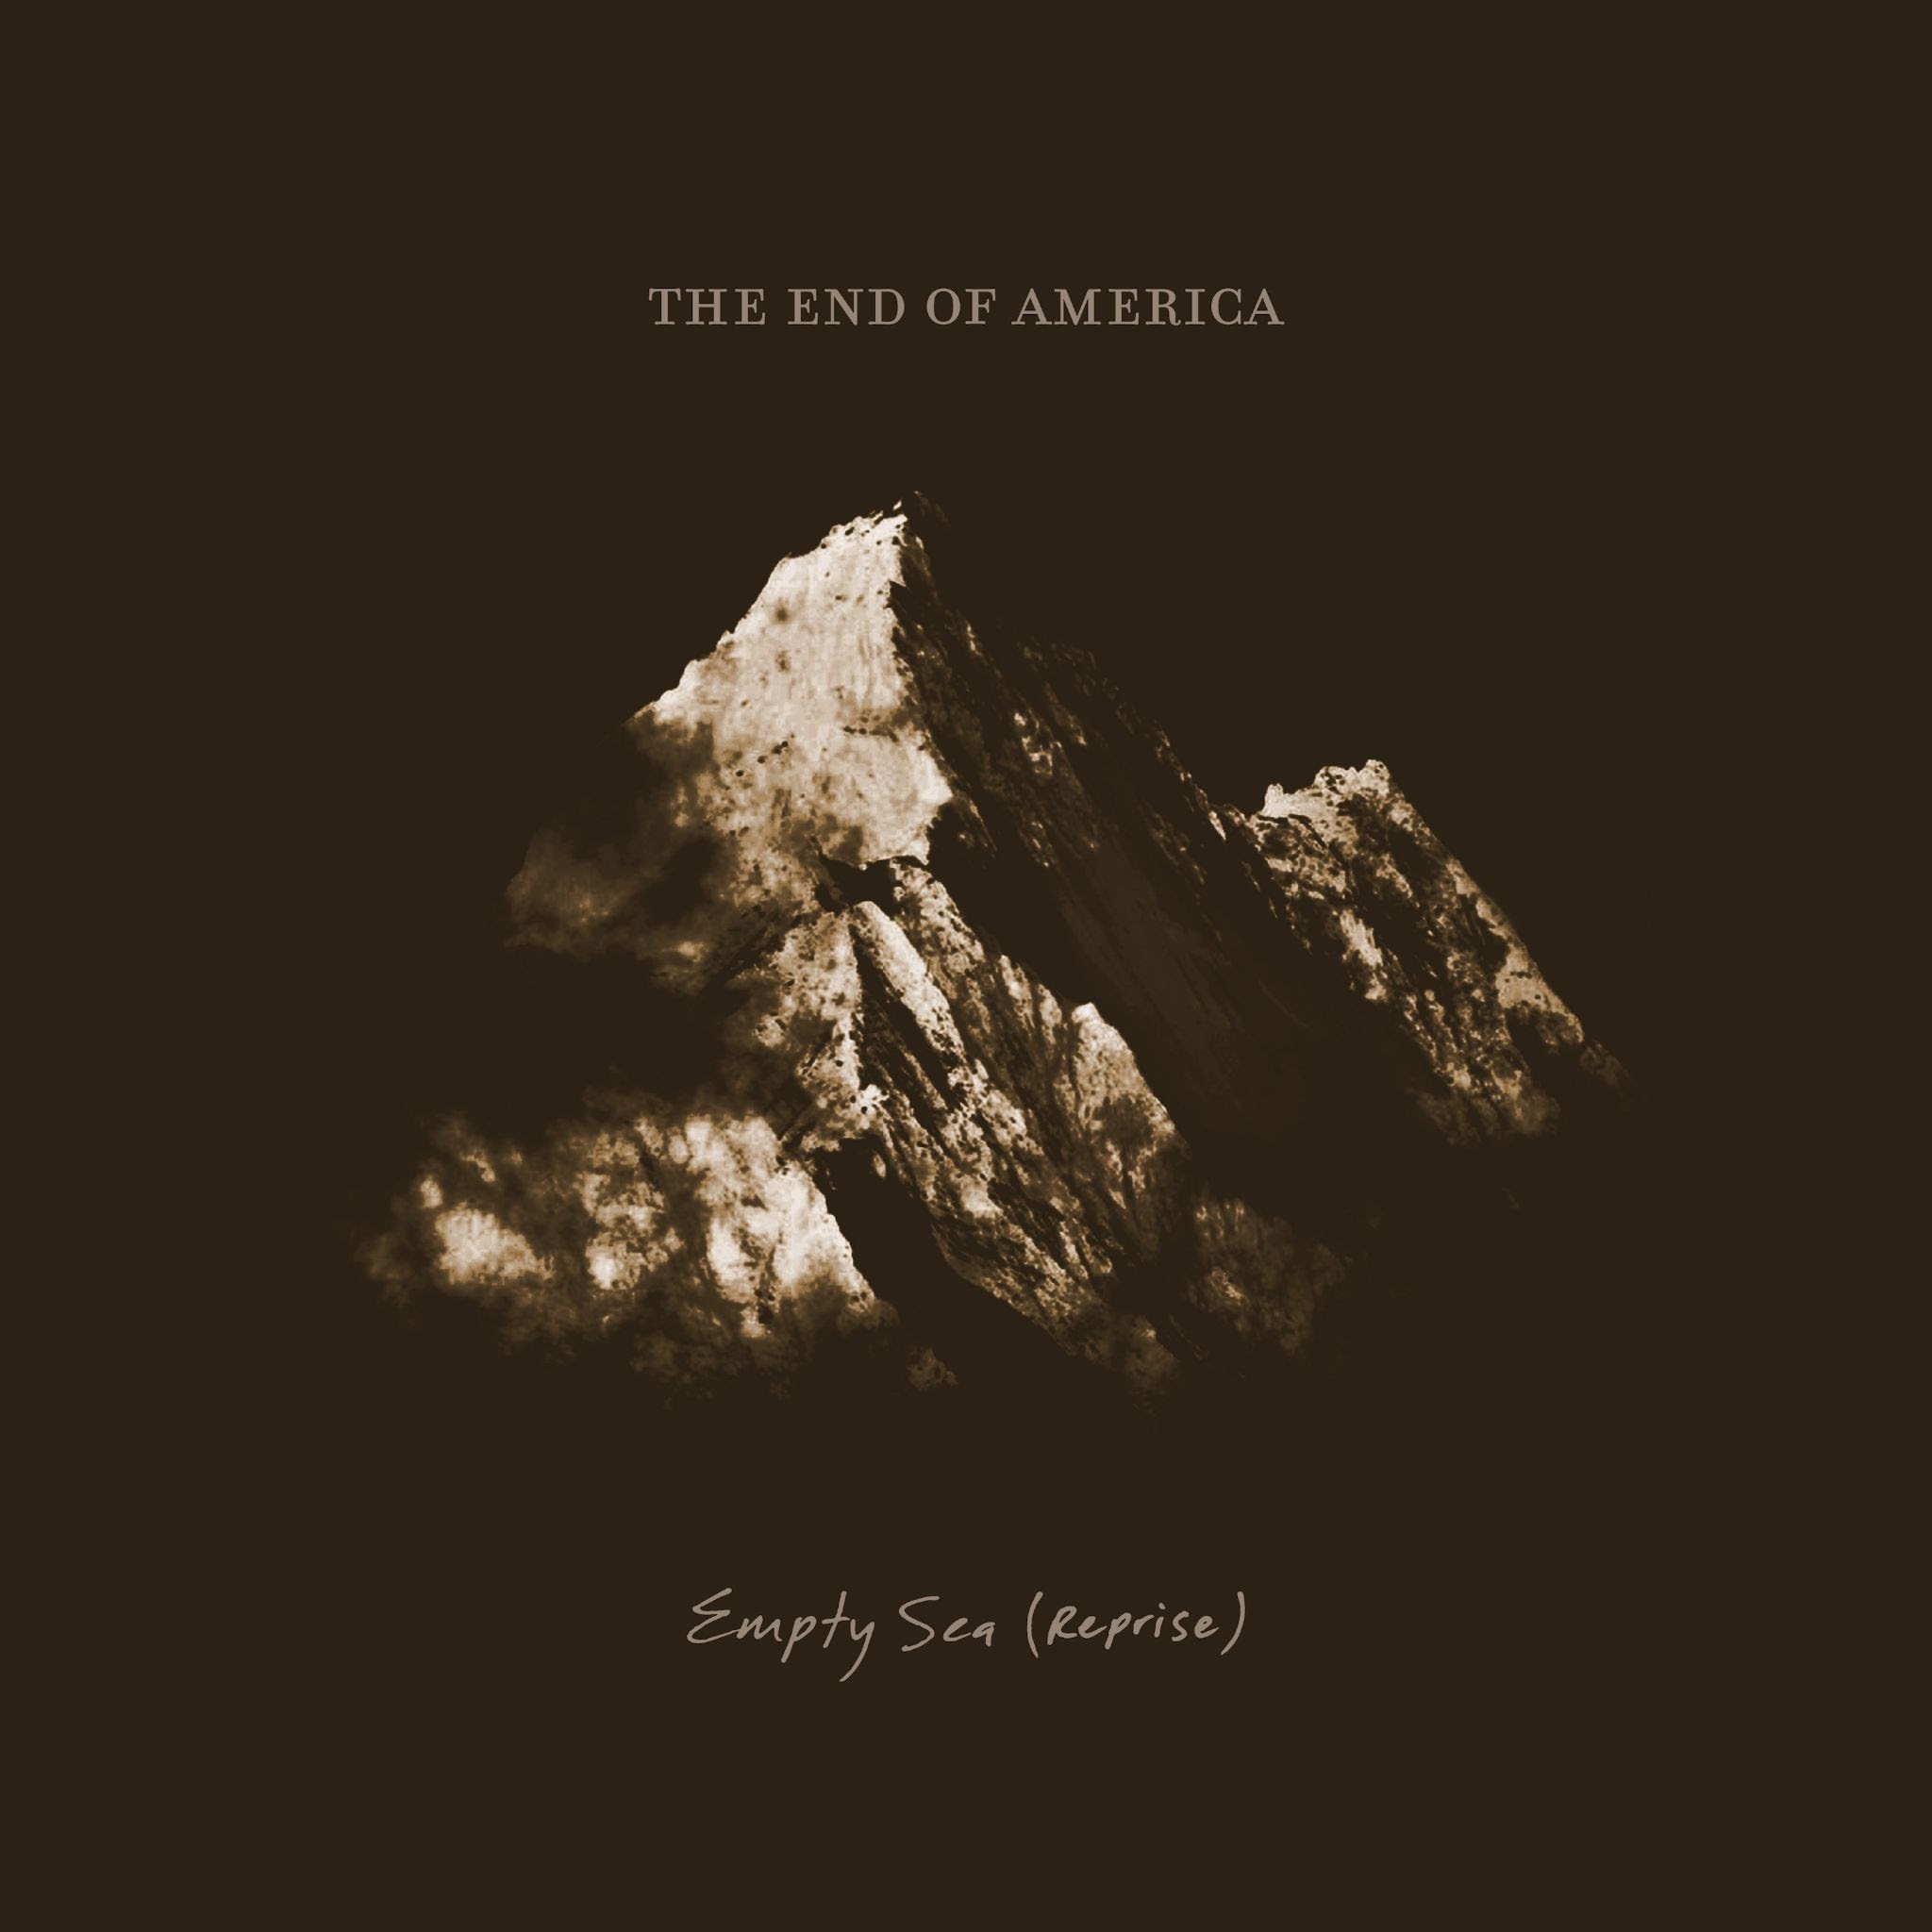 TEOA (THE END OF AMERICA) SET TO RELEASE EMPTY SEA (REPRISE) ON OCTOBER 22ND